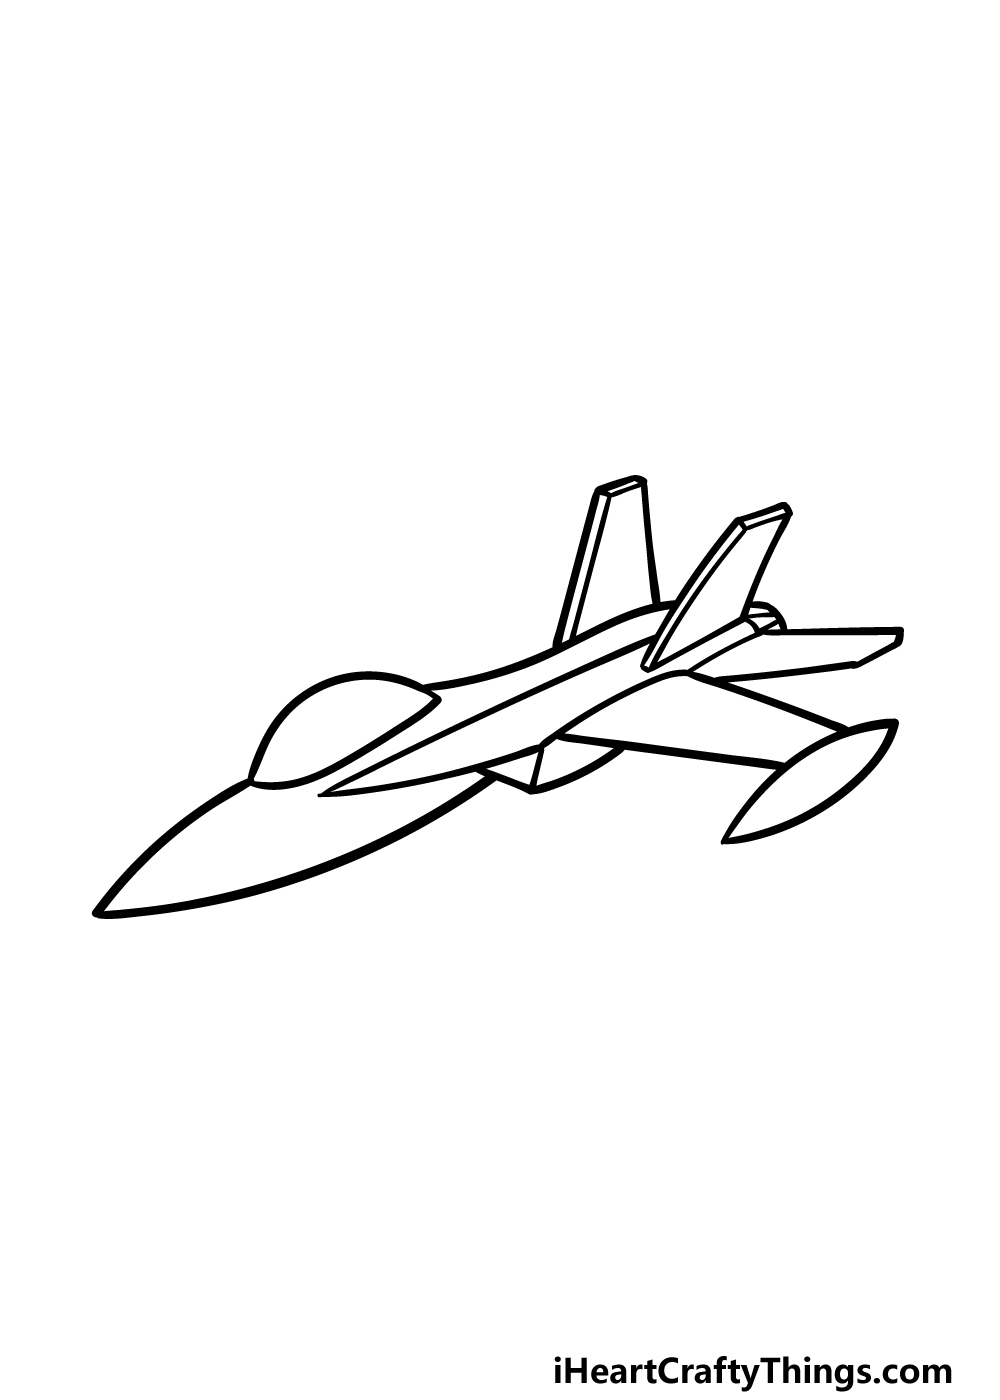 how to draw a Jet step 3